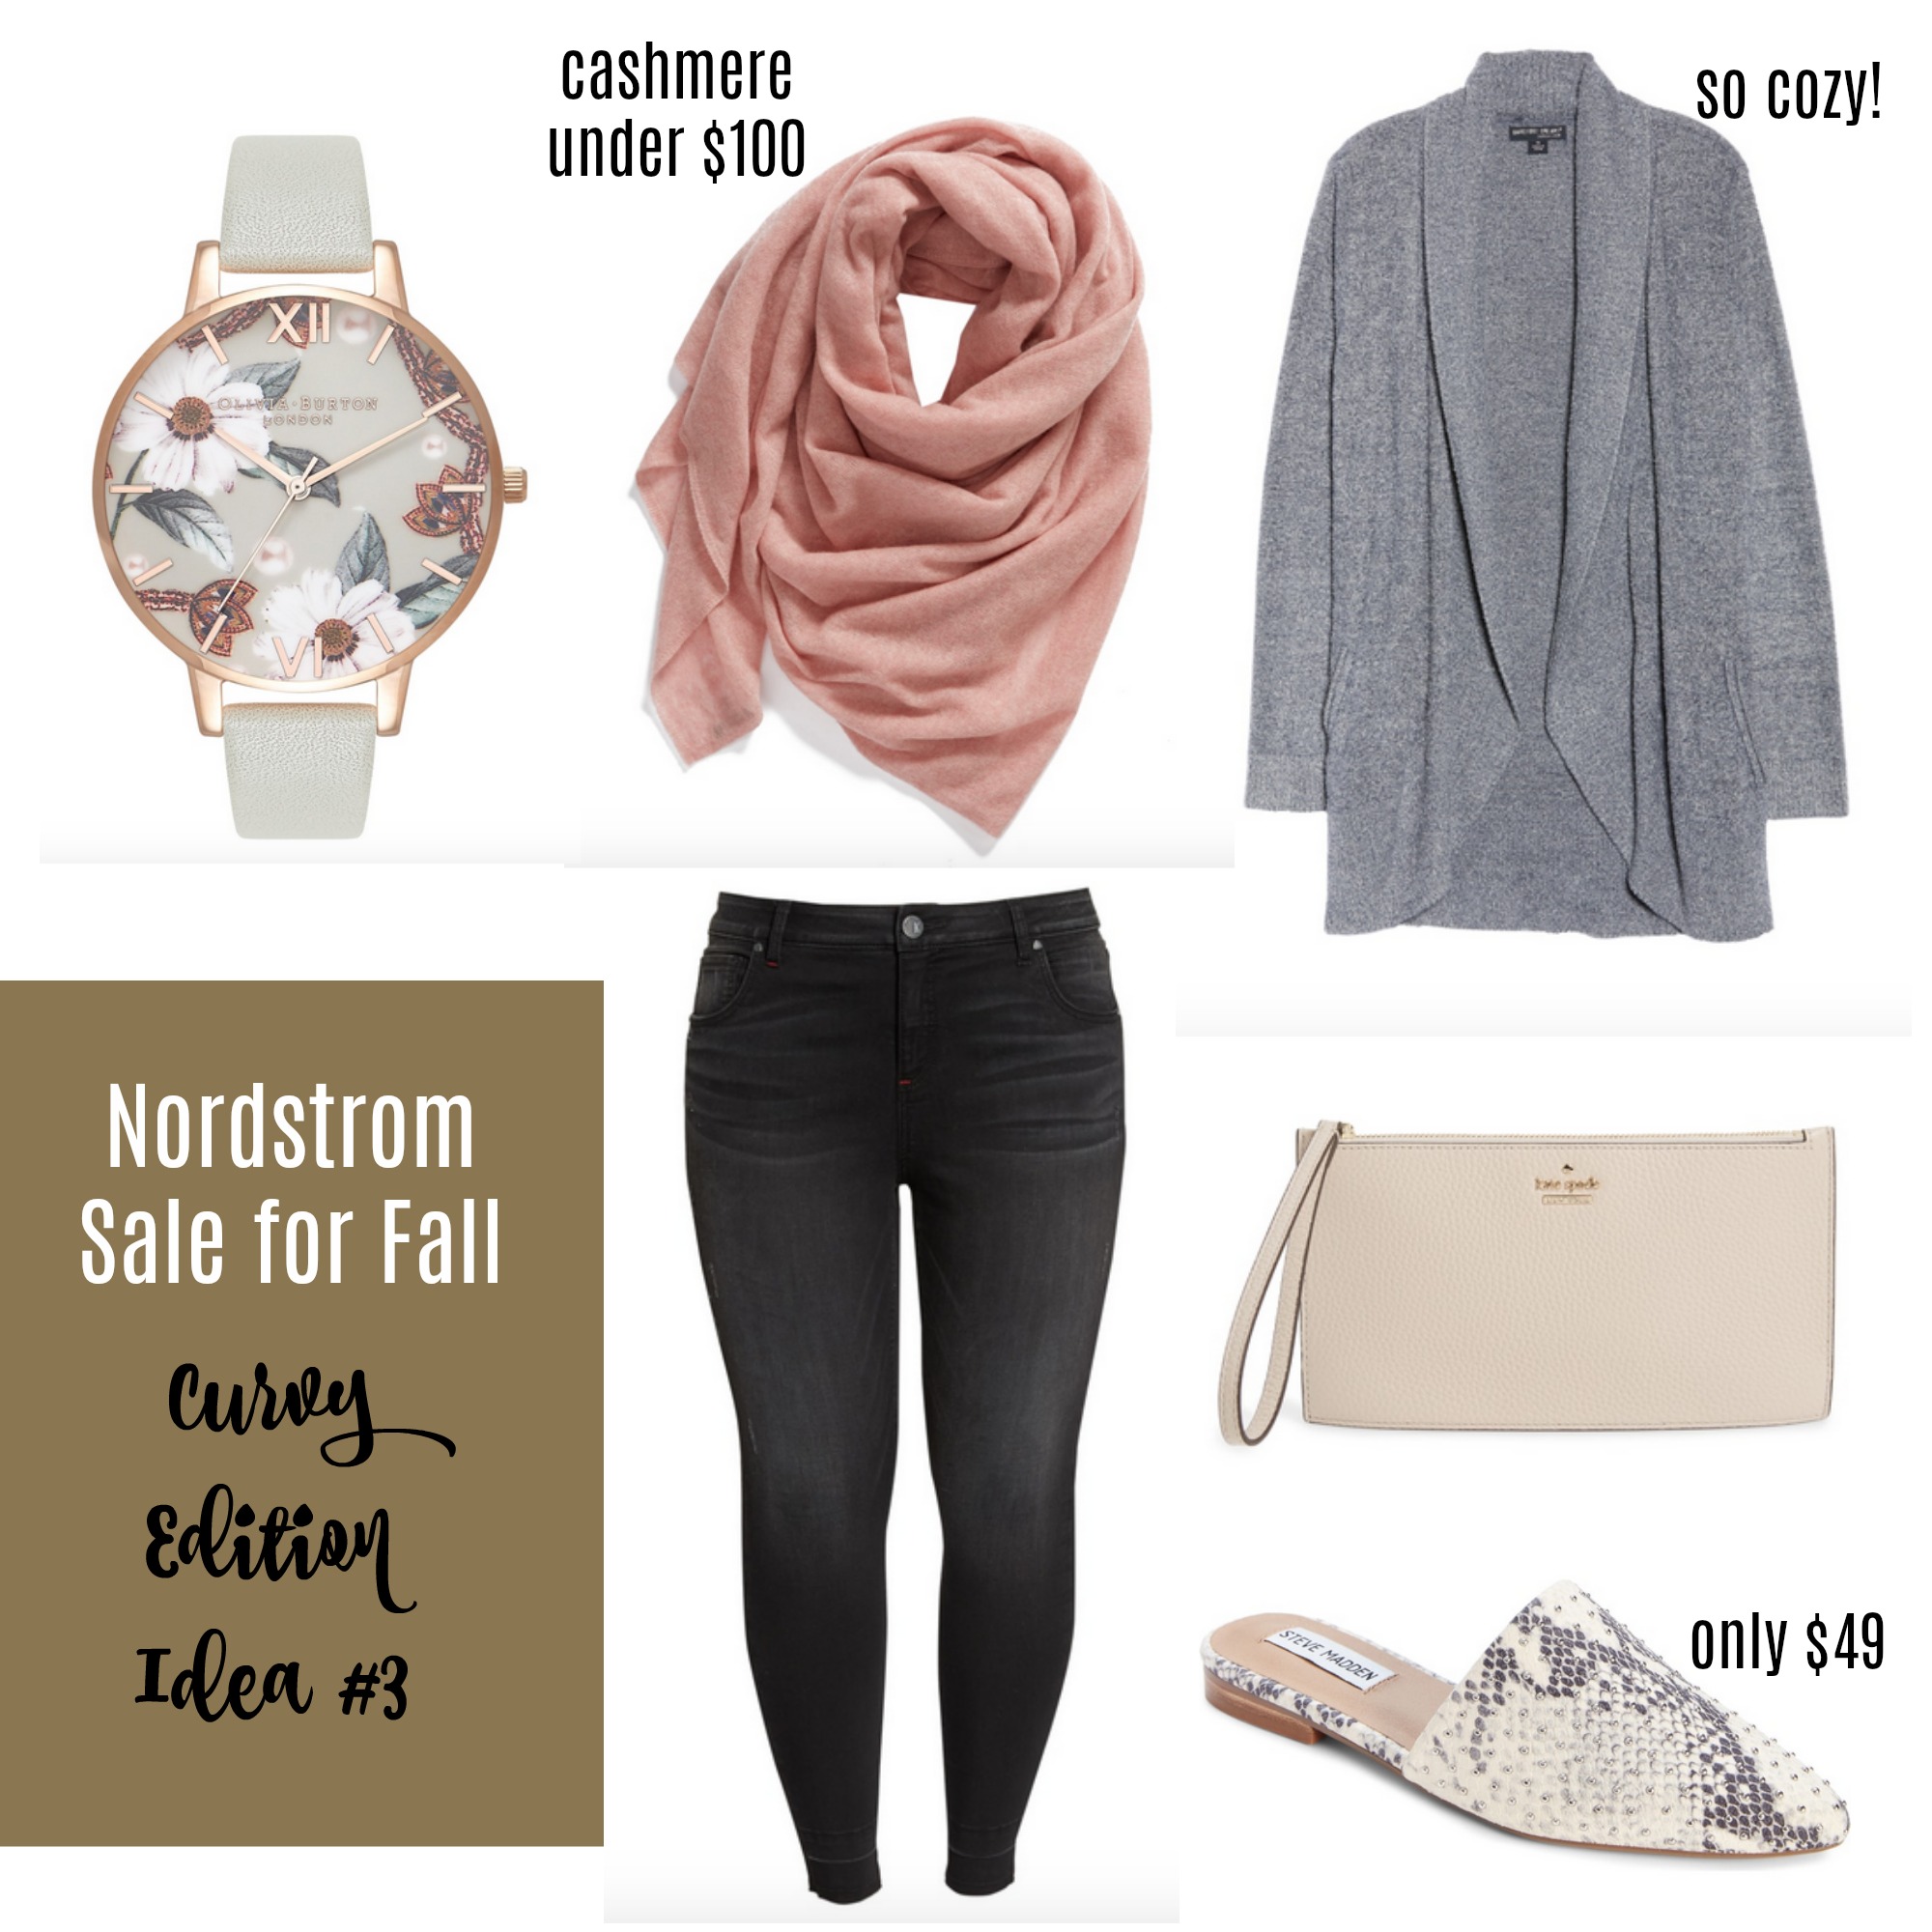 xlike to know it, nordstrom sale, plus size fashion, plus size style, curvy fashion, curvy style, nsale, scarf, fall, fall style, booties, fall booties